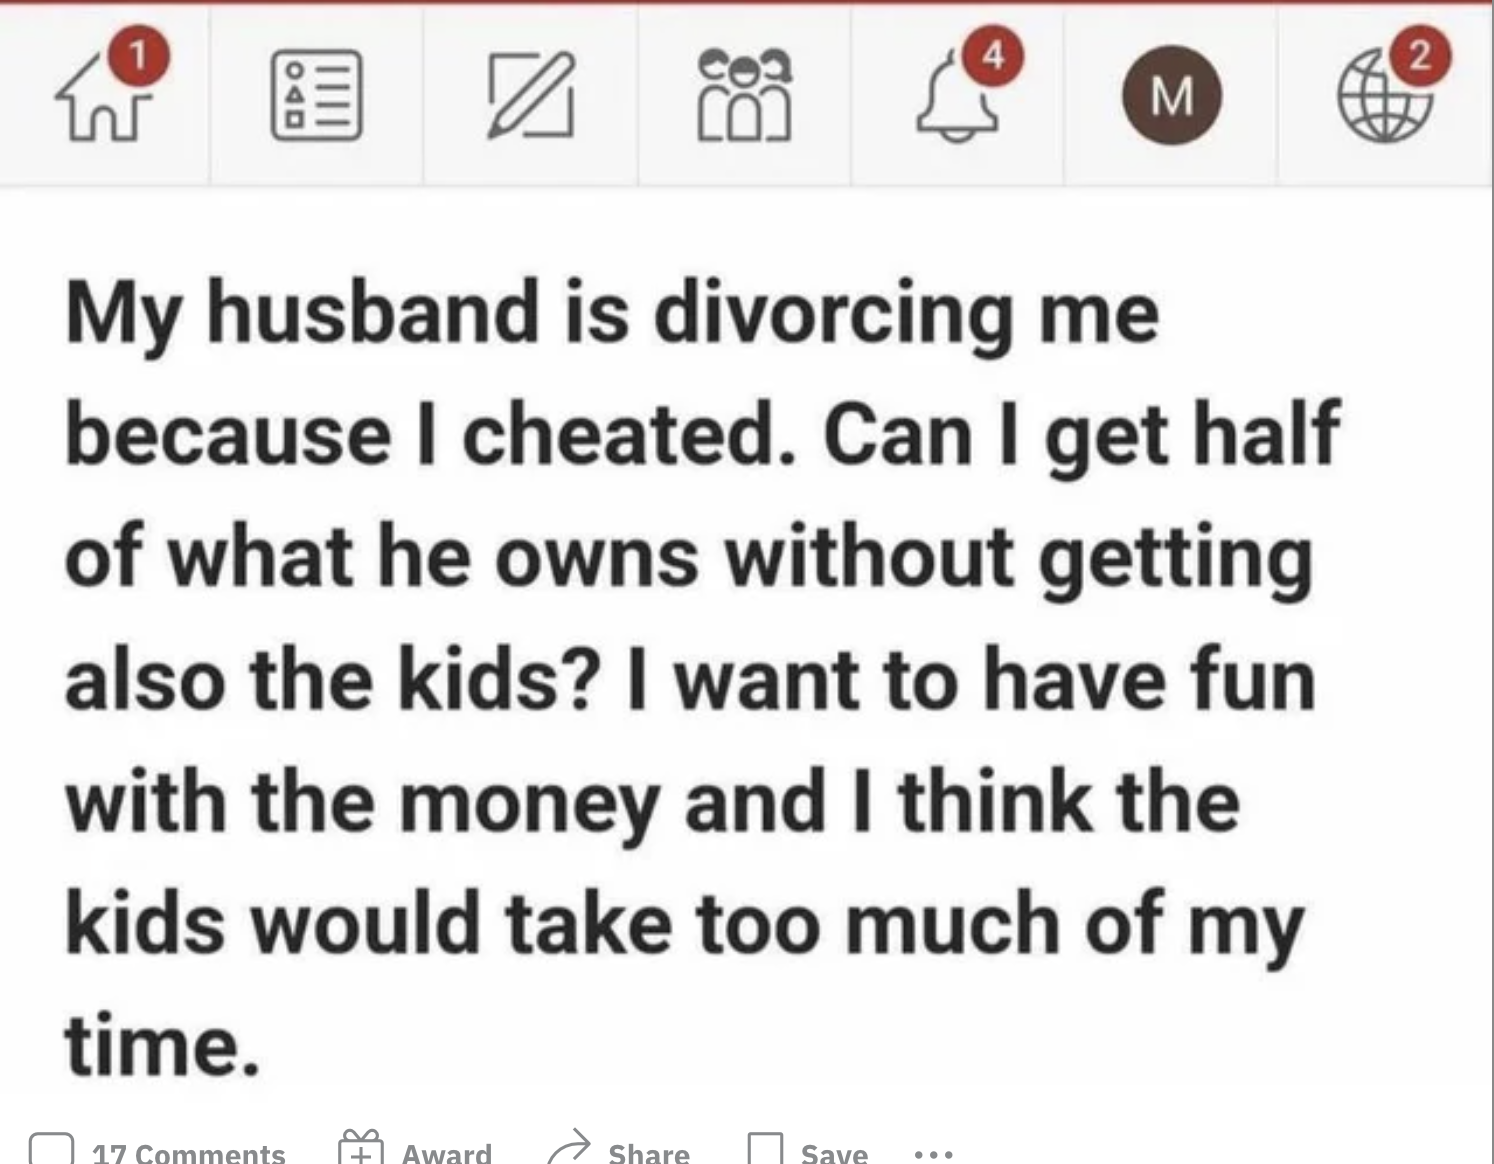 Facepalms - whisky story -My husband is divorcing me because I cheated. Can I get half of what he owns without getting also the kids? I want to have fun with the money and I think the kids would take too much of my time.